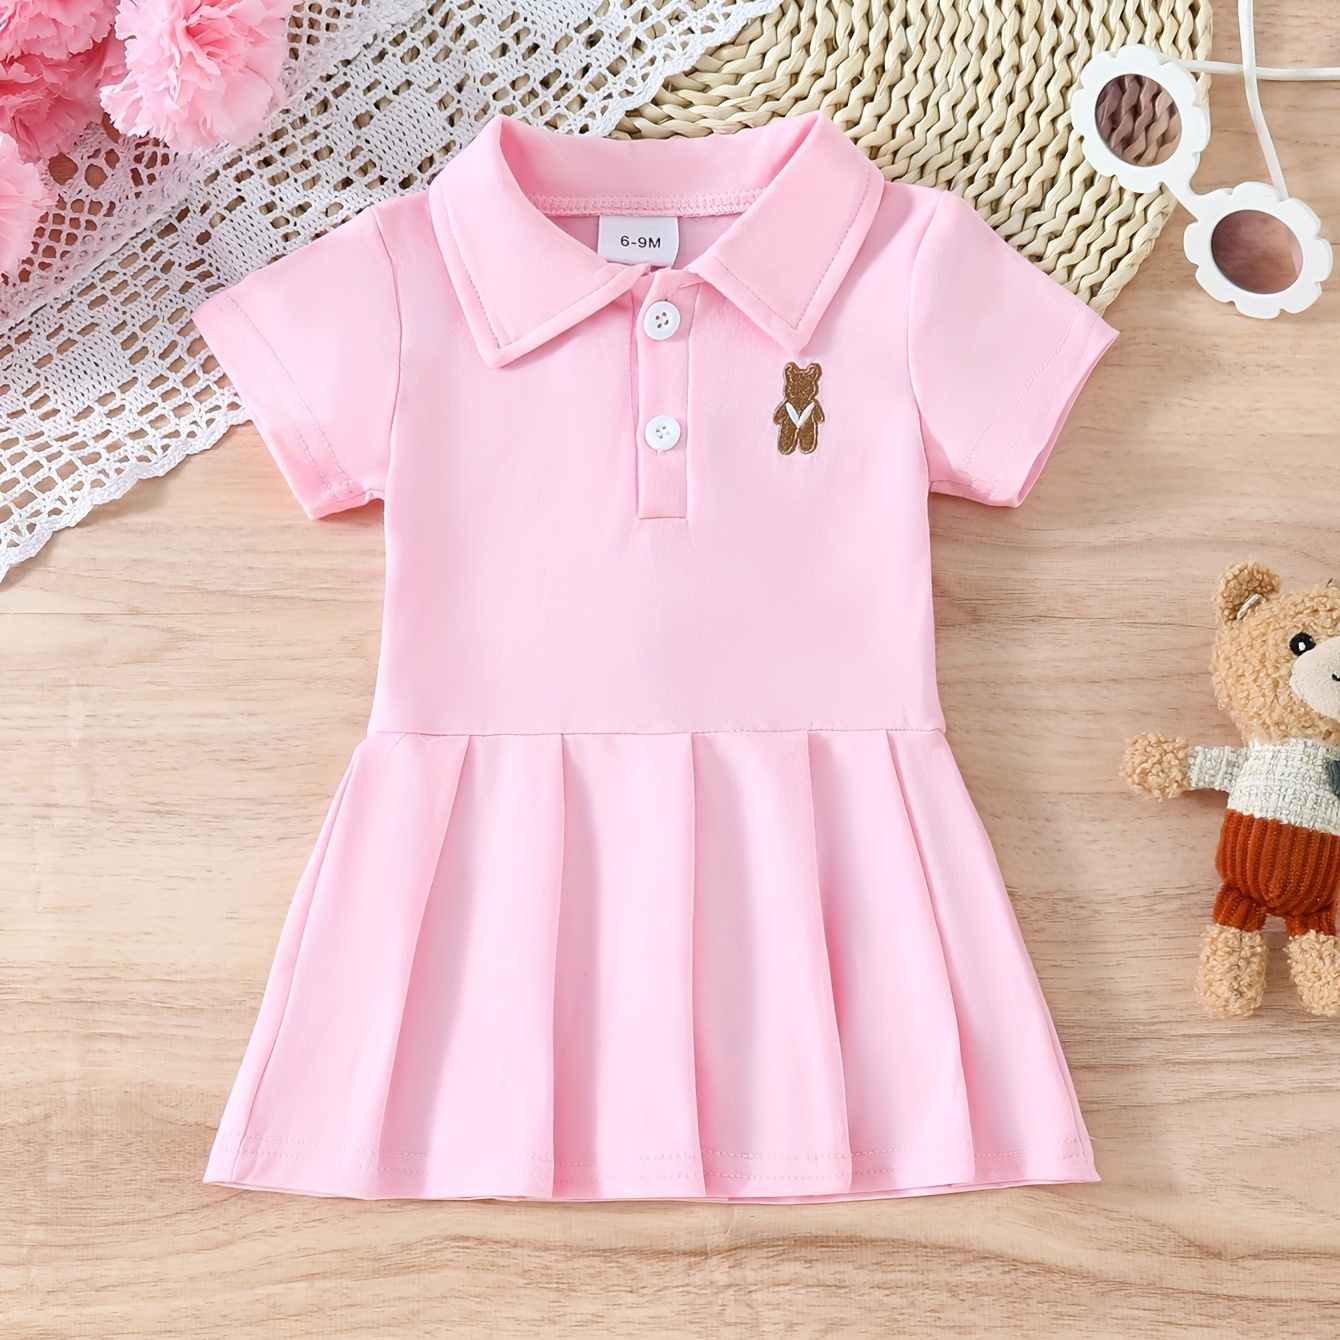 

Baby's Sporty Style Bear Embroidered Short Sleeve Pleated Dress, Infant & Toddler Girl's Clothing For Summer/spring, As Gift